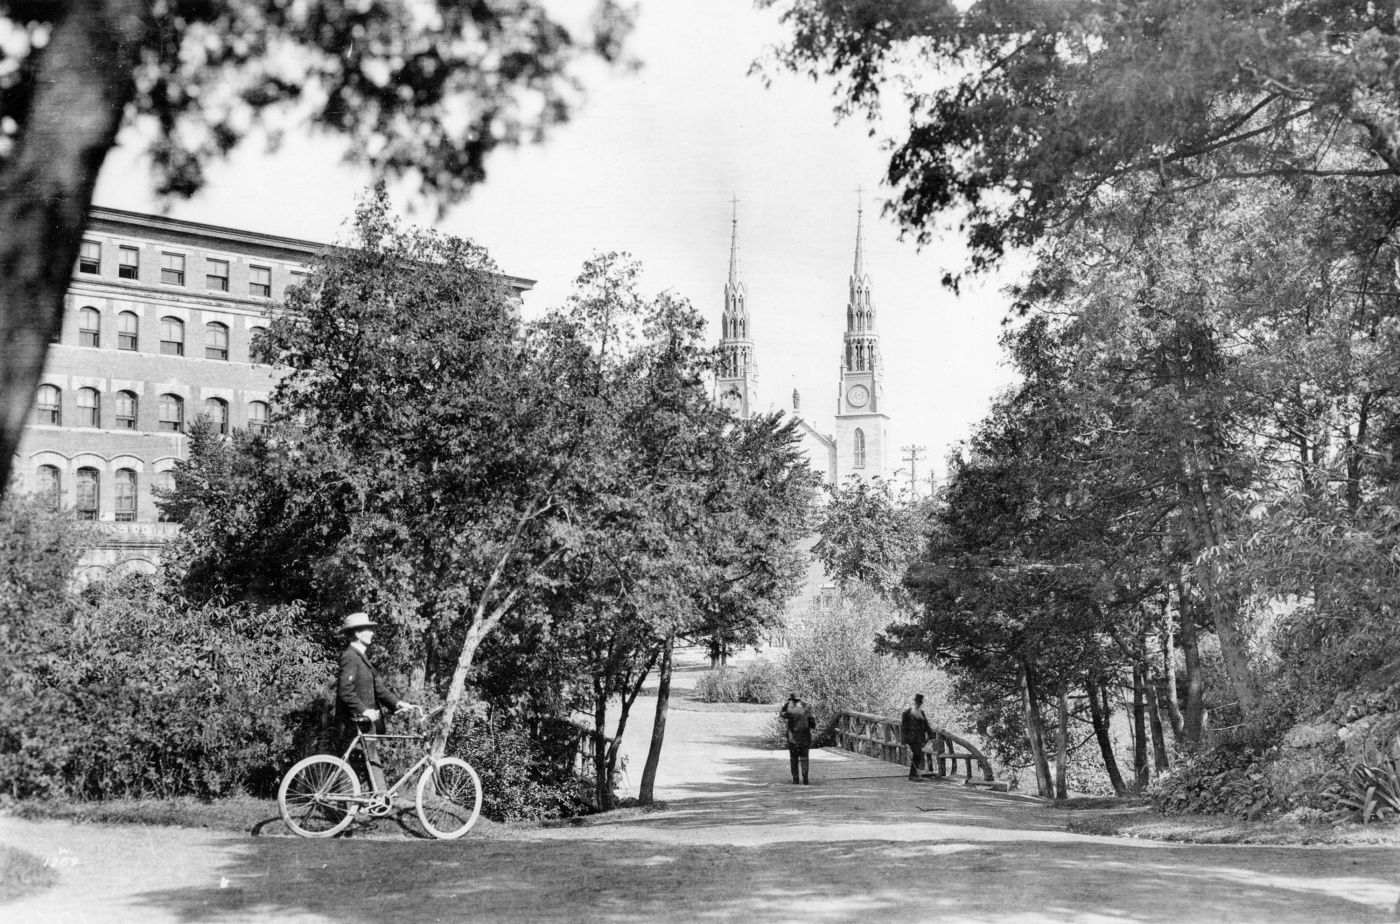 Black and white photograph showing a man walking beside his bicycle. He is moving toward a tree-lined esplanade leading to a wooden bridge. Two men are crossing the bridge on foot. Two steeples of a large church are visible in the background between the trees.